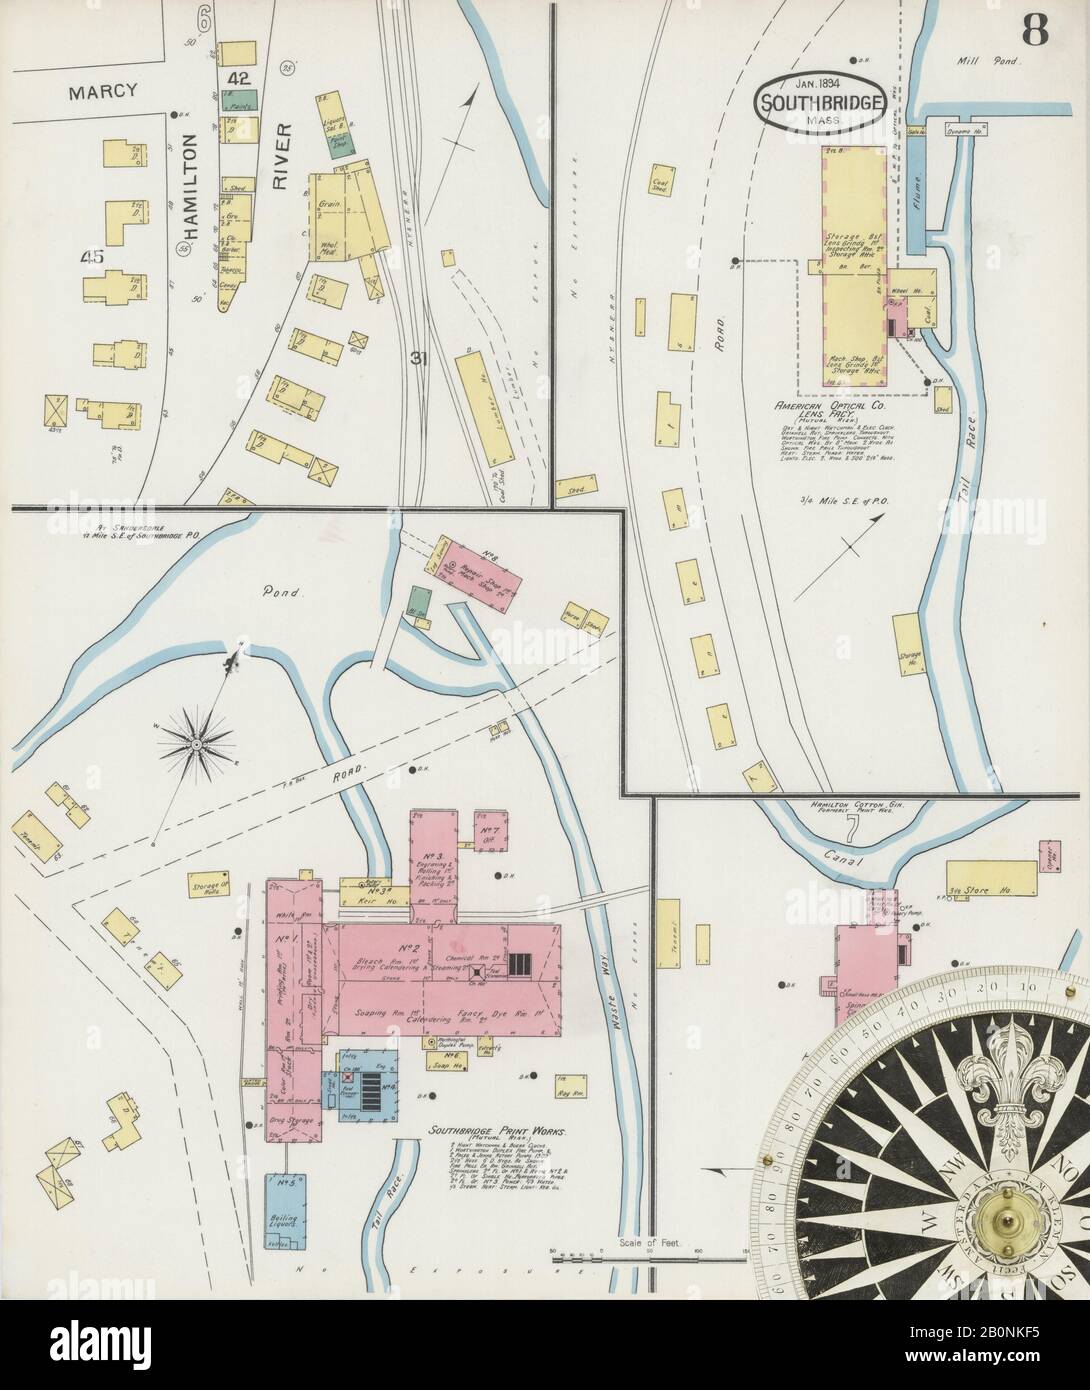 Image 8 of Sanborn Fire Insurance Map from Southbridge, Worcester County, Massachusetts. Jan 1894. 10 Sheet(s). Includes Globe Village, Sturbridge, Fiskdale, America, street map with a Nineteenth Century compass Stock Photo